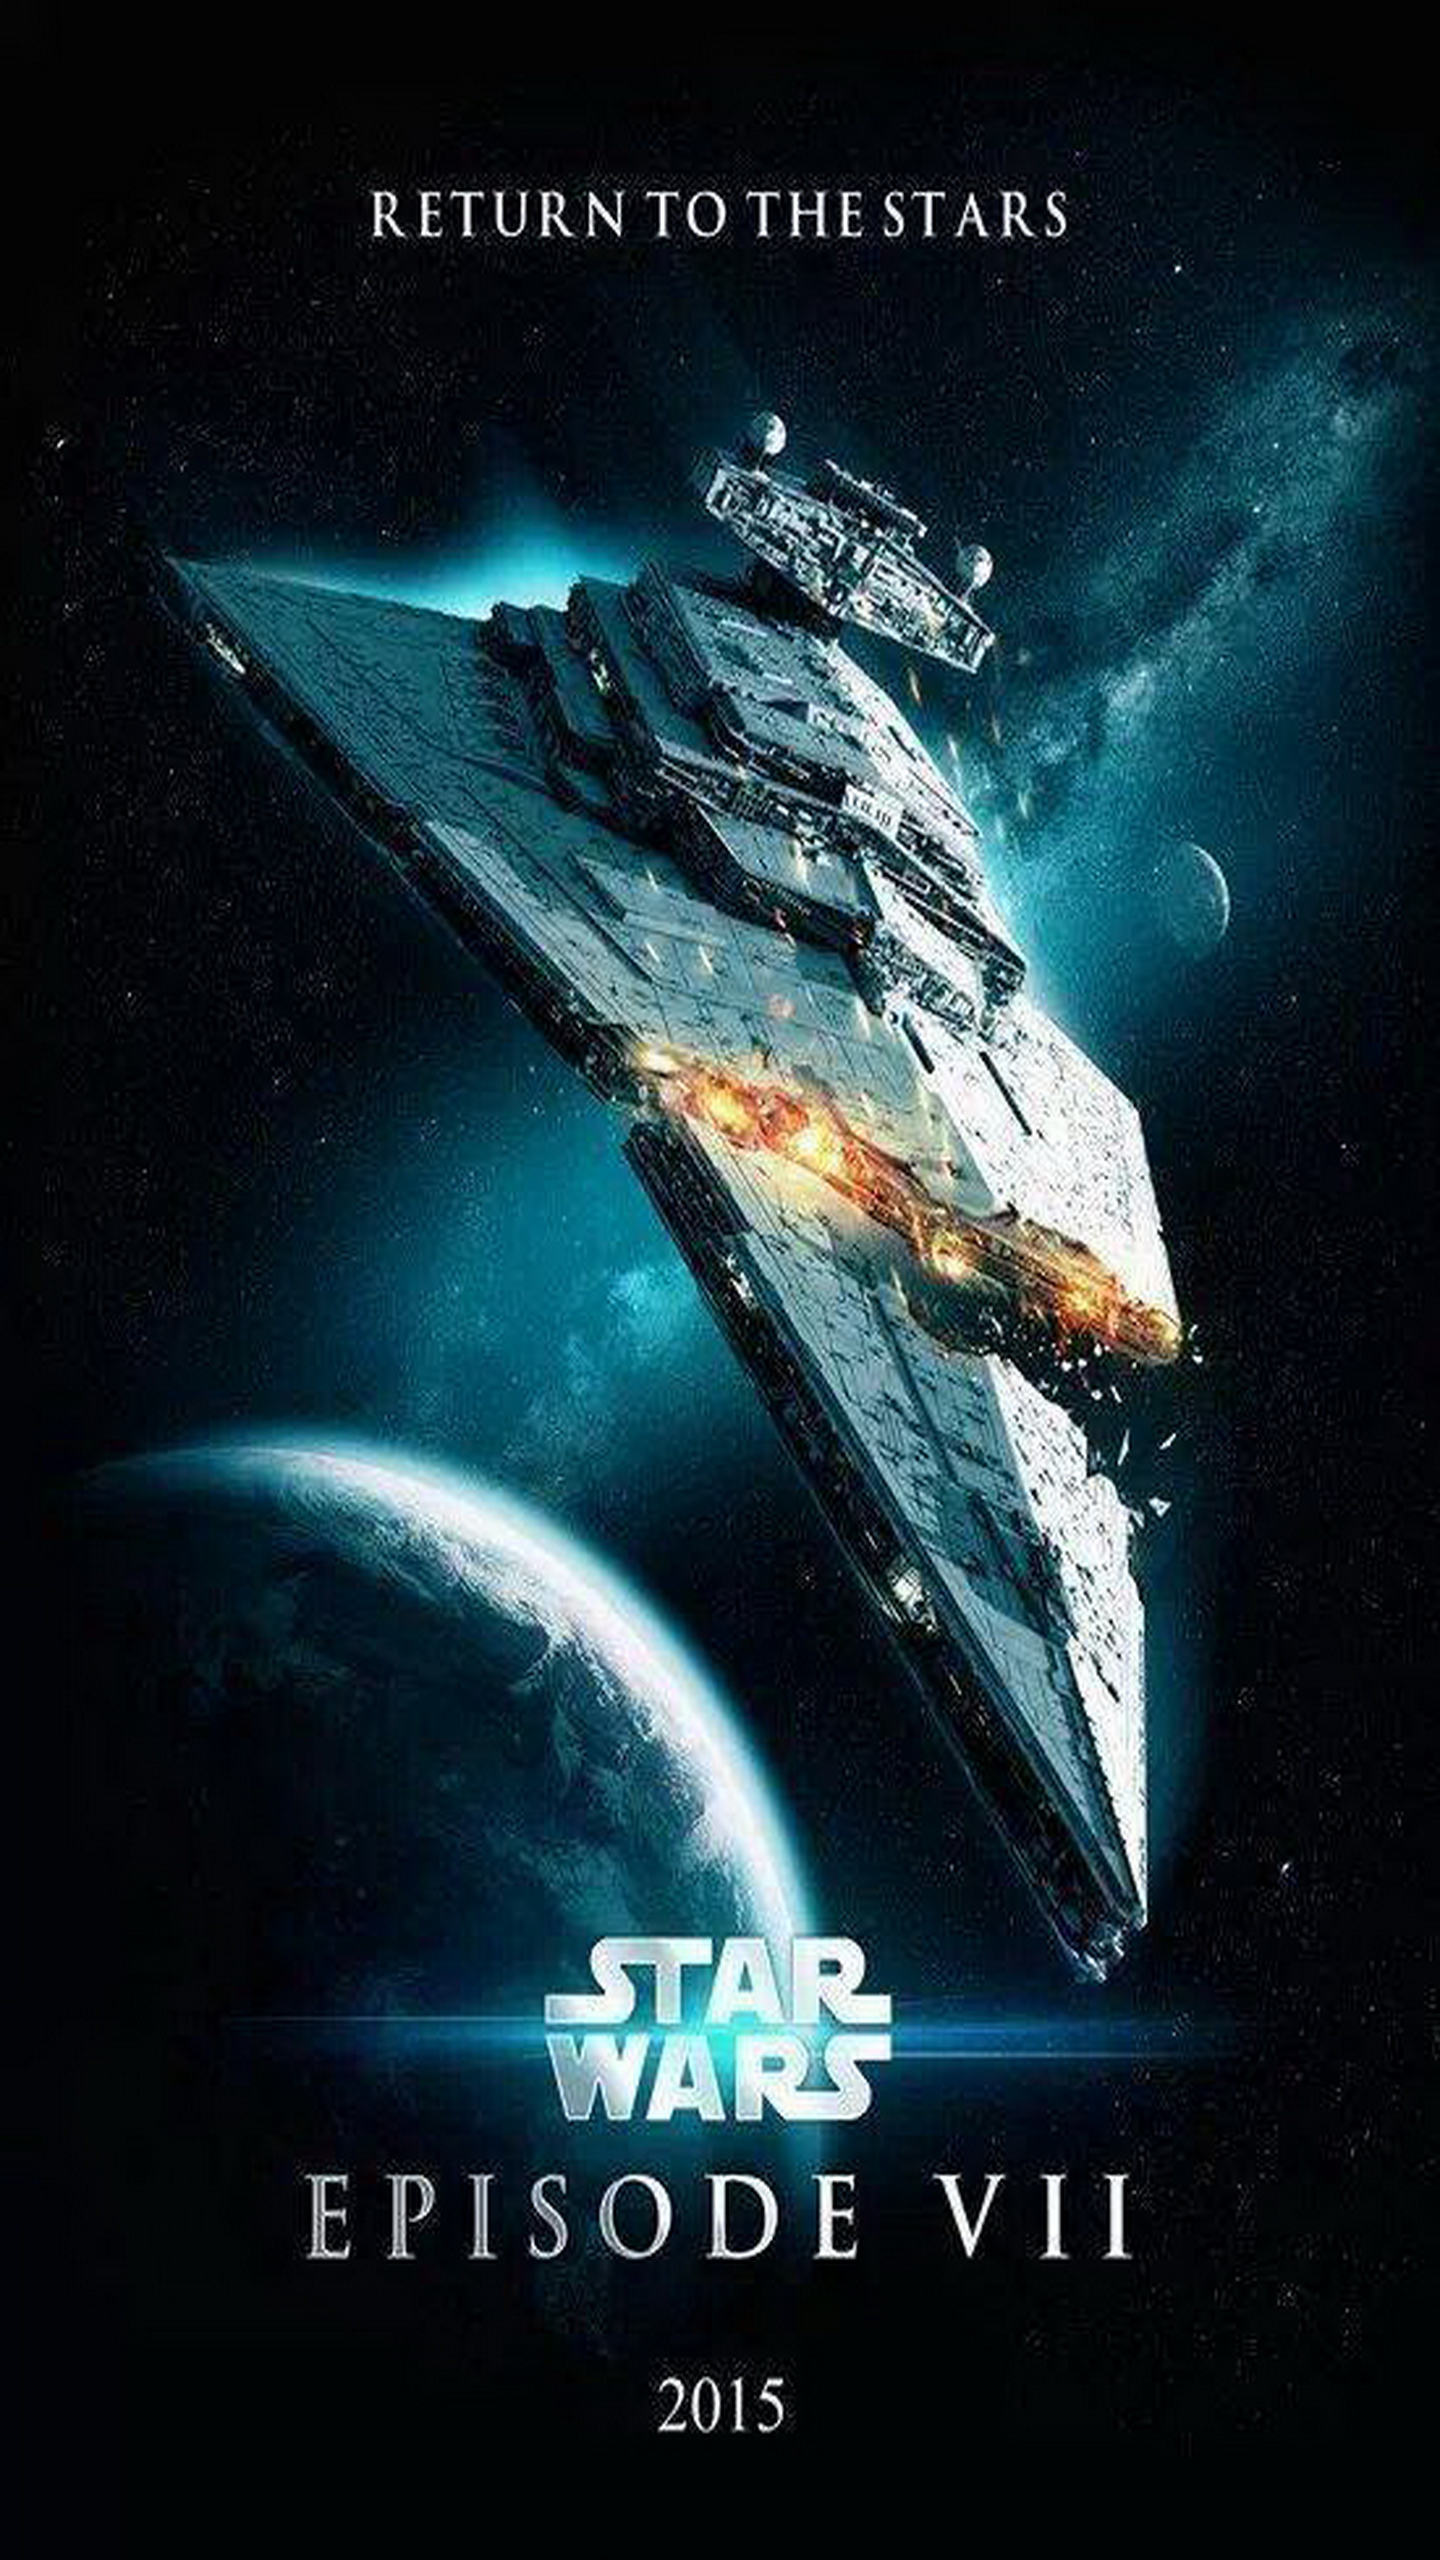 Star Wars Episode VII The Force Awakens 2015 Poster Galaxy Note